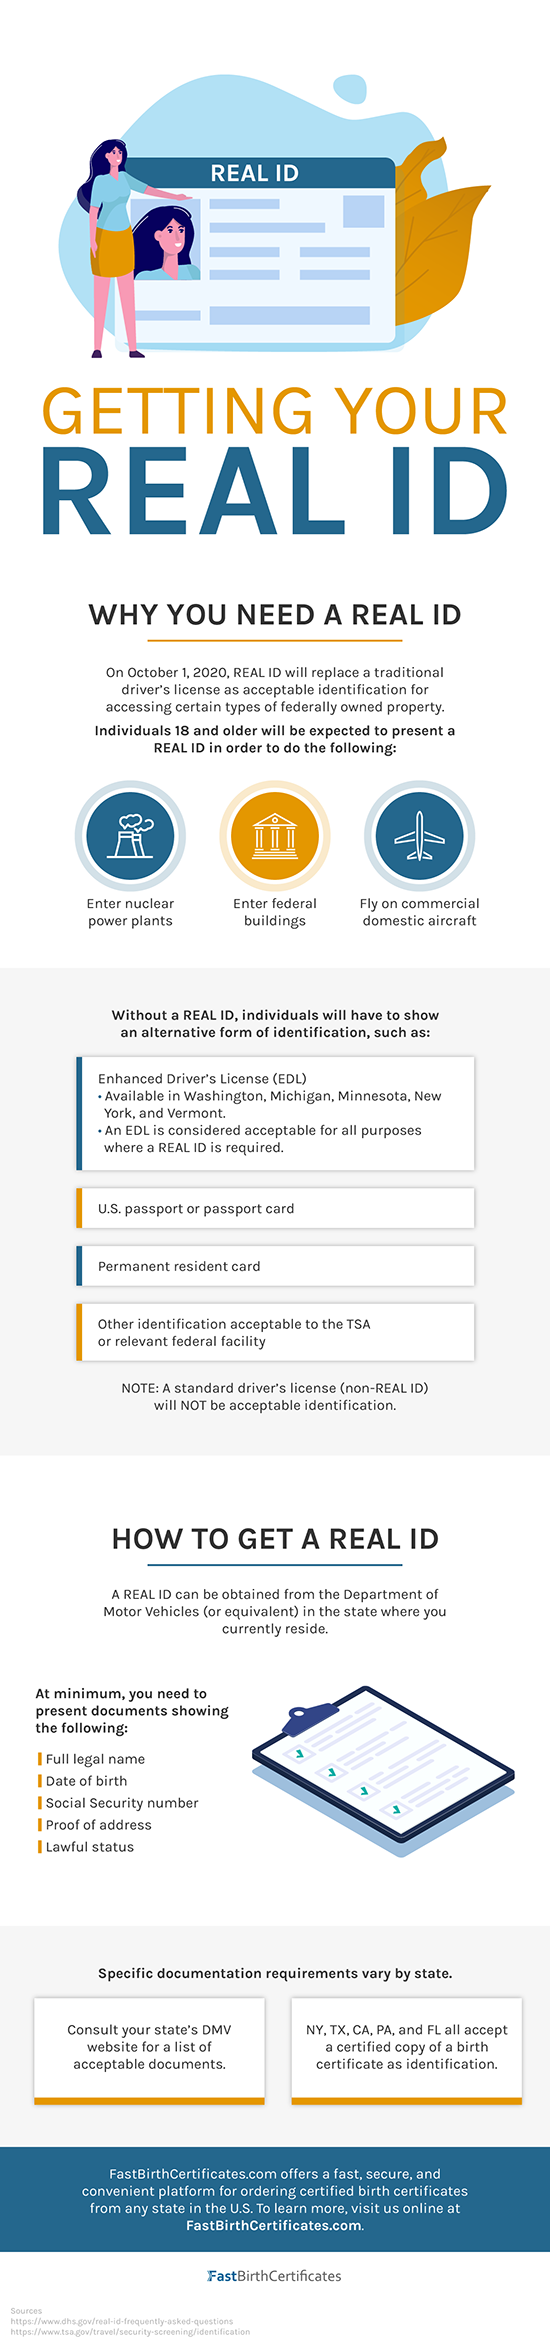 Getting Your REAL ID: Why You Need a REAL ID (Infographic)